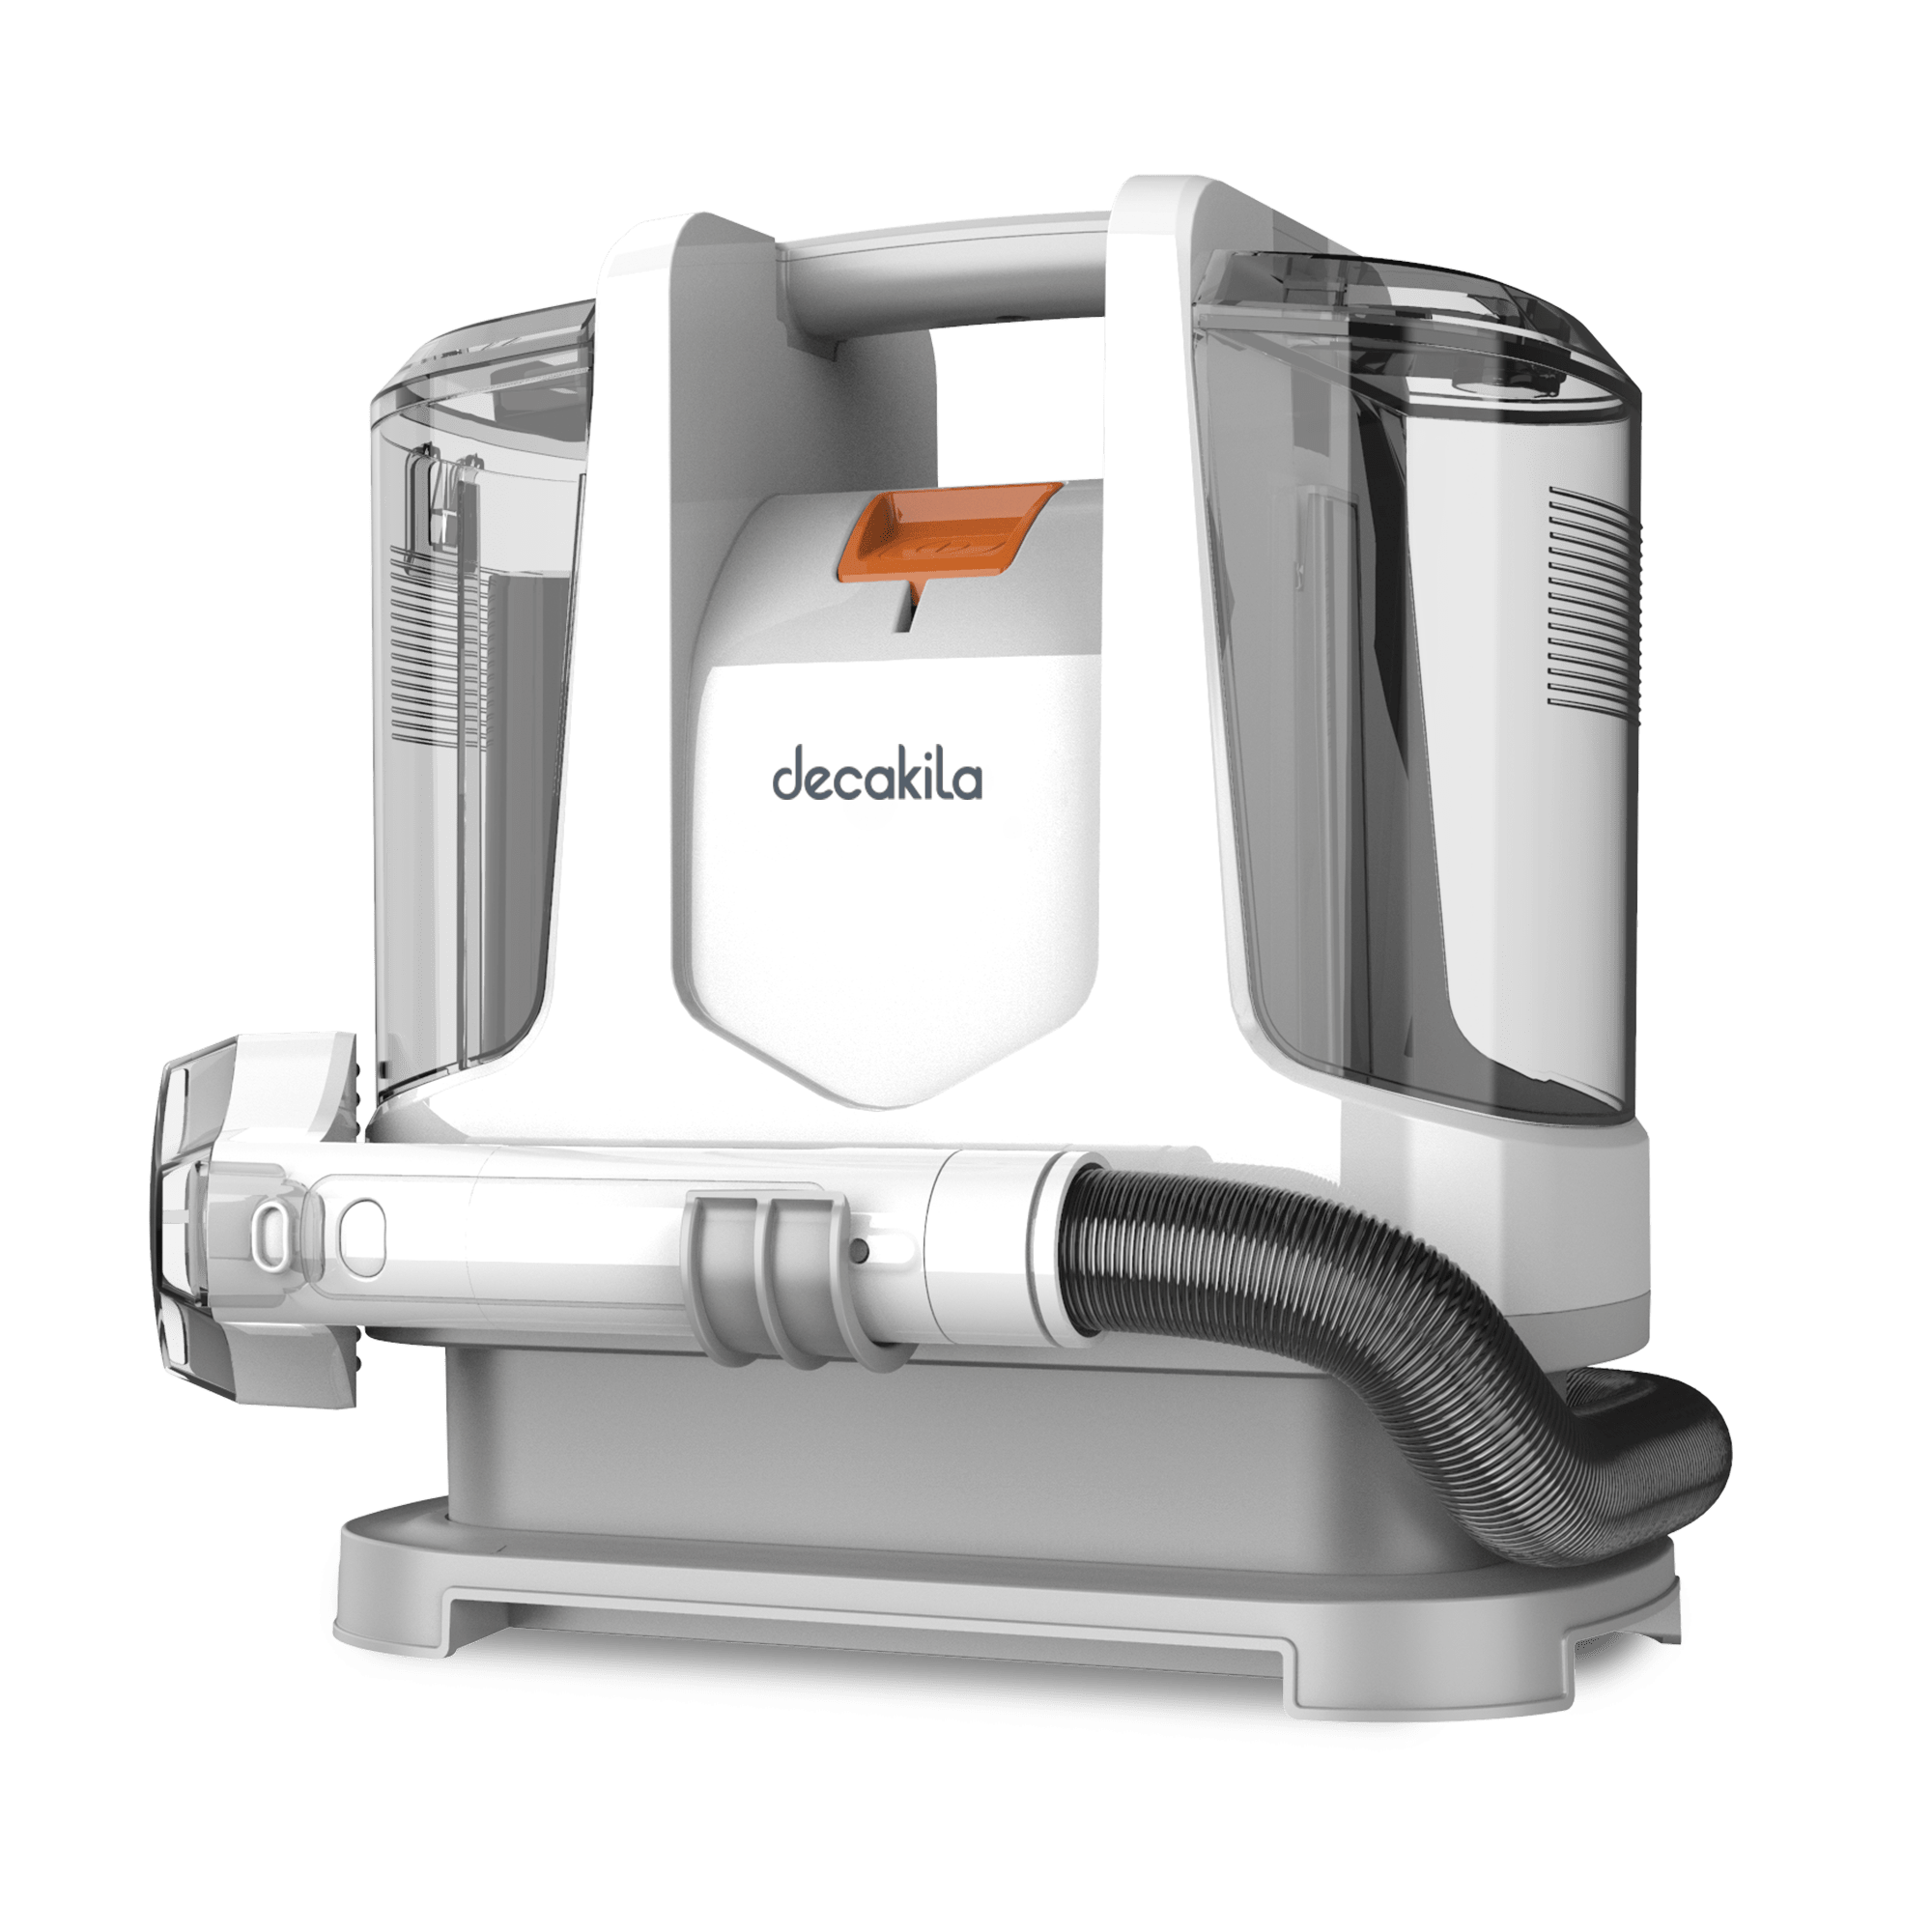 Decakila Portable Spot Cleaner - CEVC006W | Buy Online in Accra, Ghana - Supply Master Steam & Vacuum Cleaner Buy Tools hardware Building materials